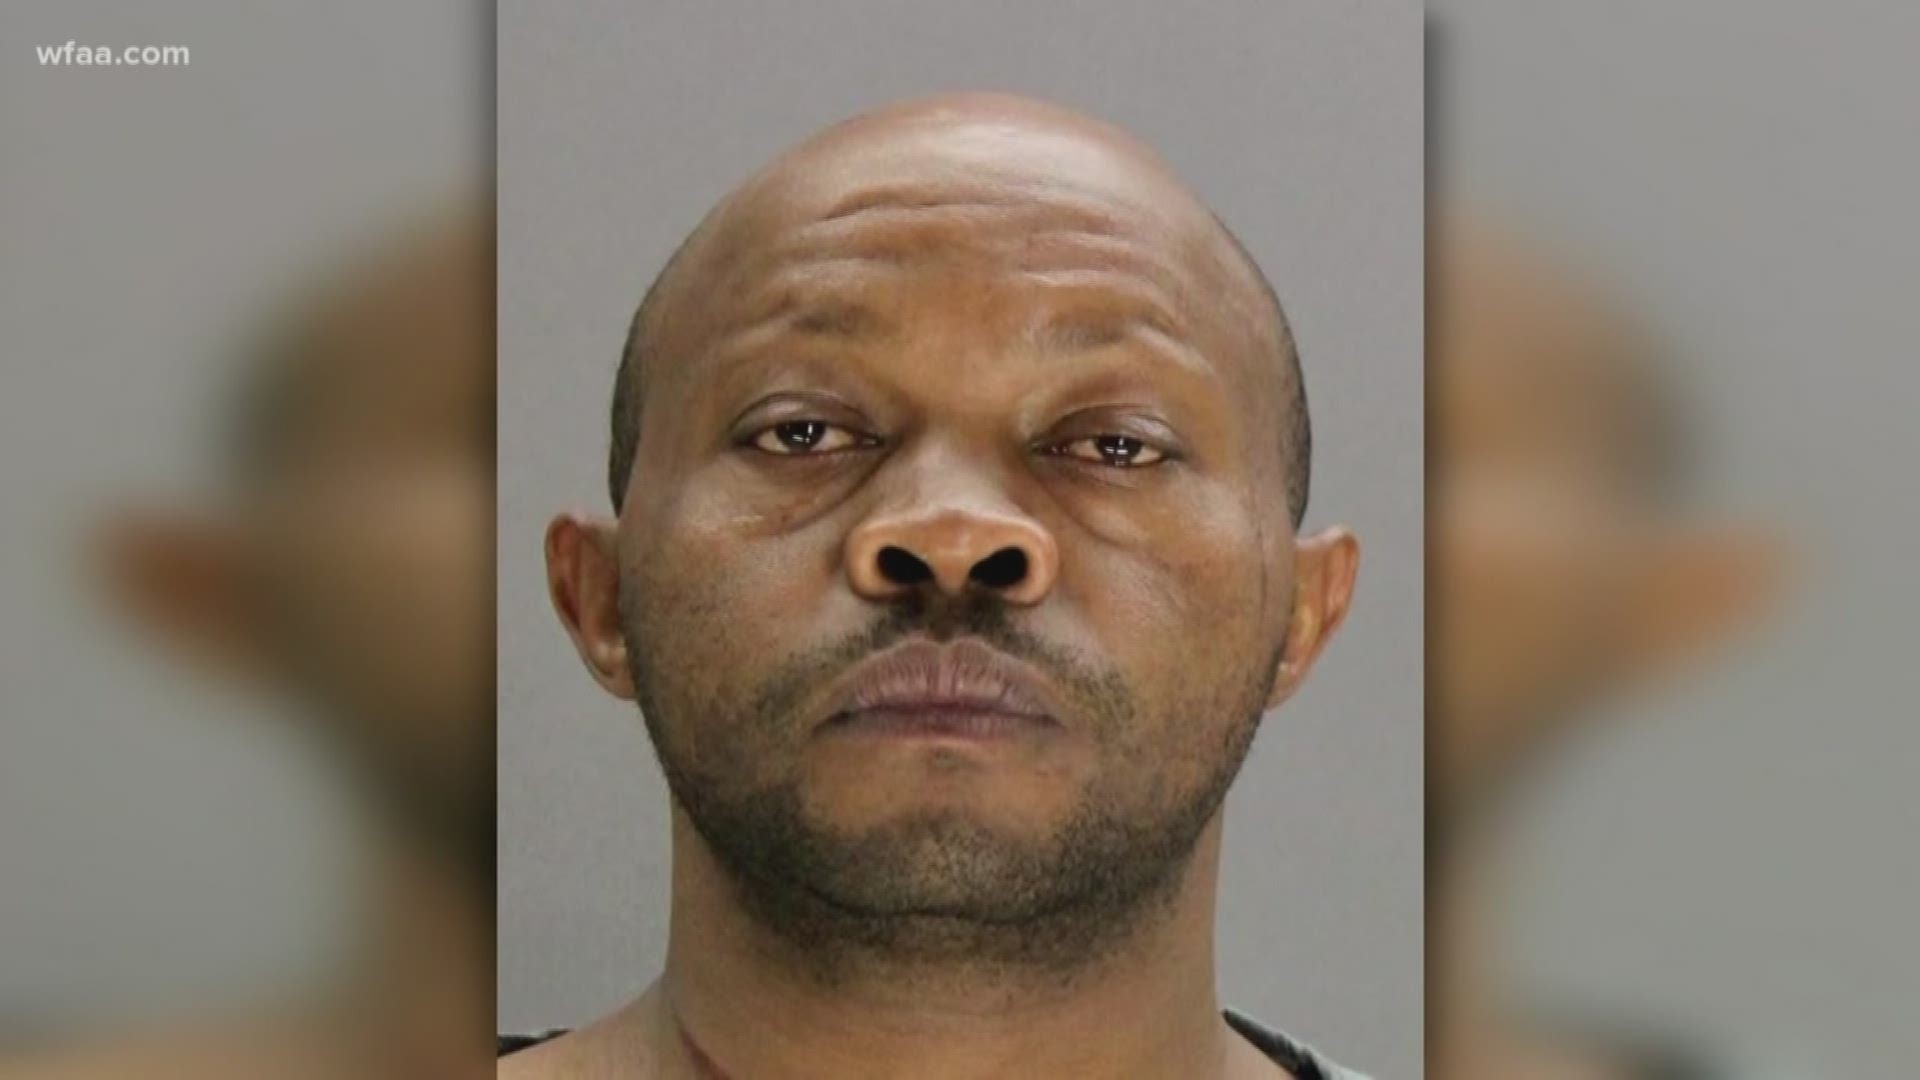 Suspected serial killer Billy Chemirmir was indicted in the deaths of three more women this month. That makes 17 victims police say they can tie to him.